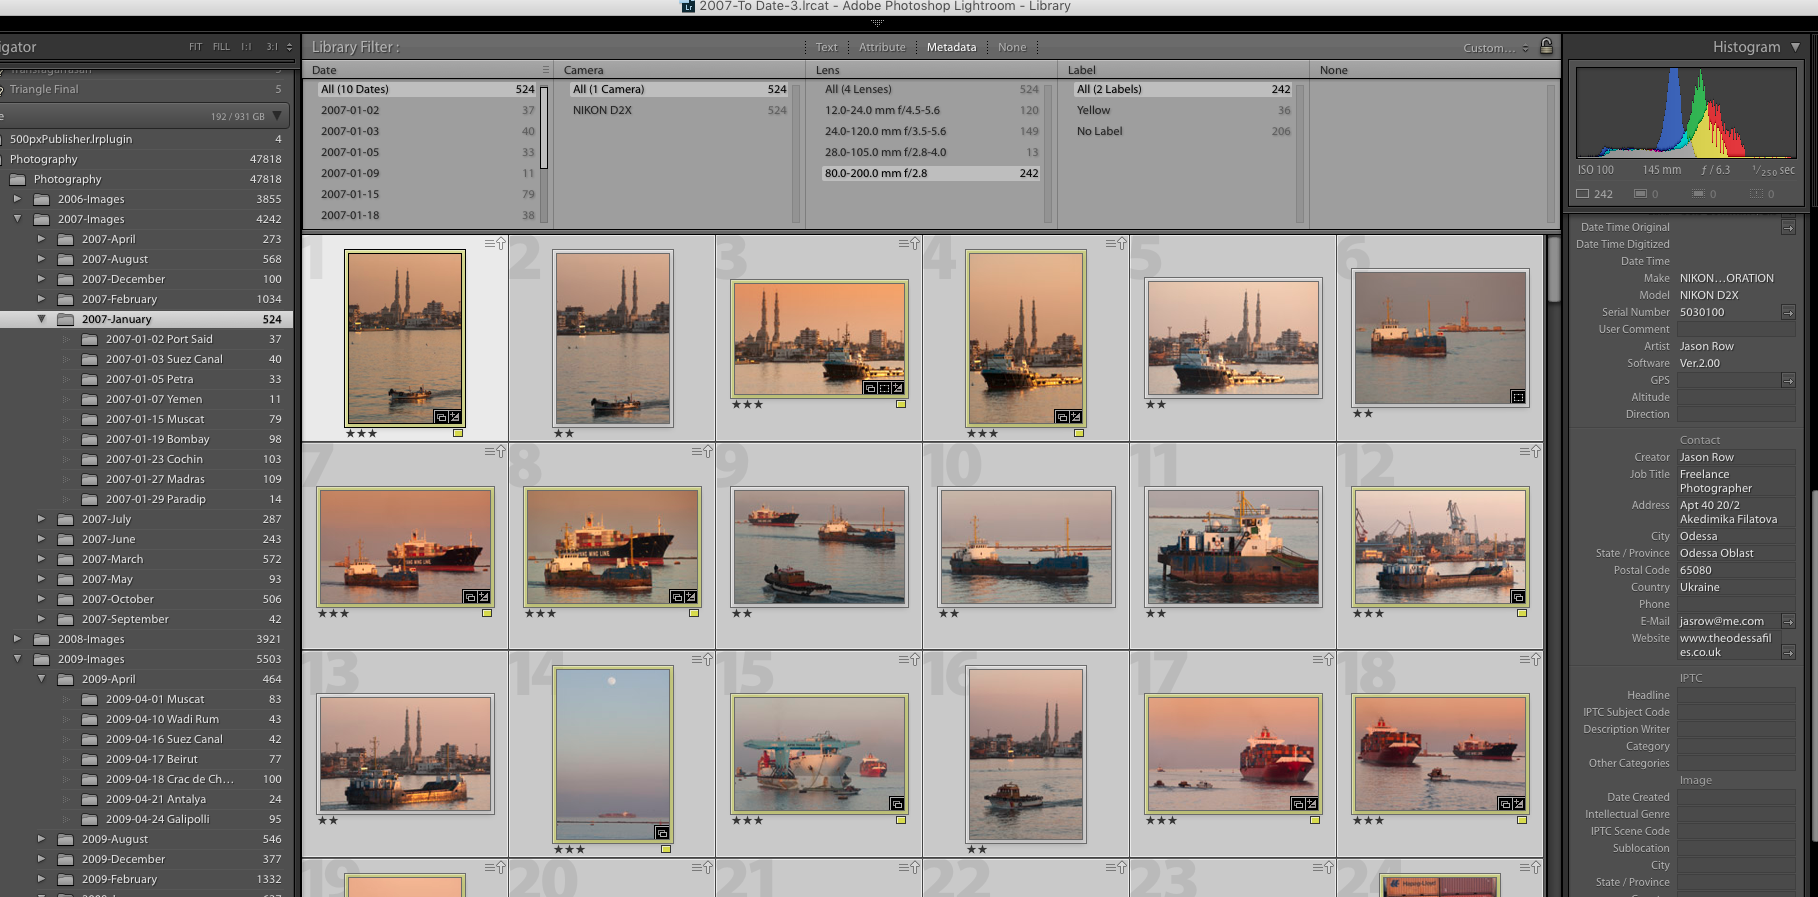 You can use EXIF data to search for images in Lightroom